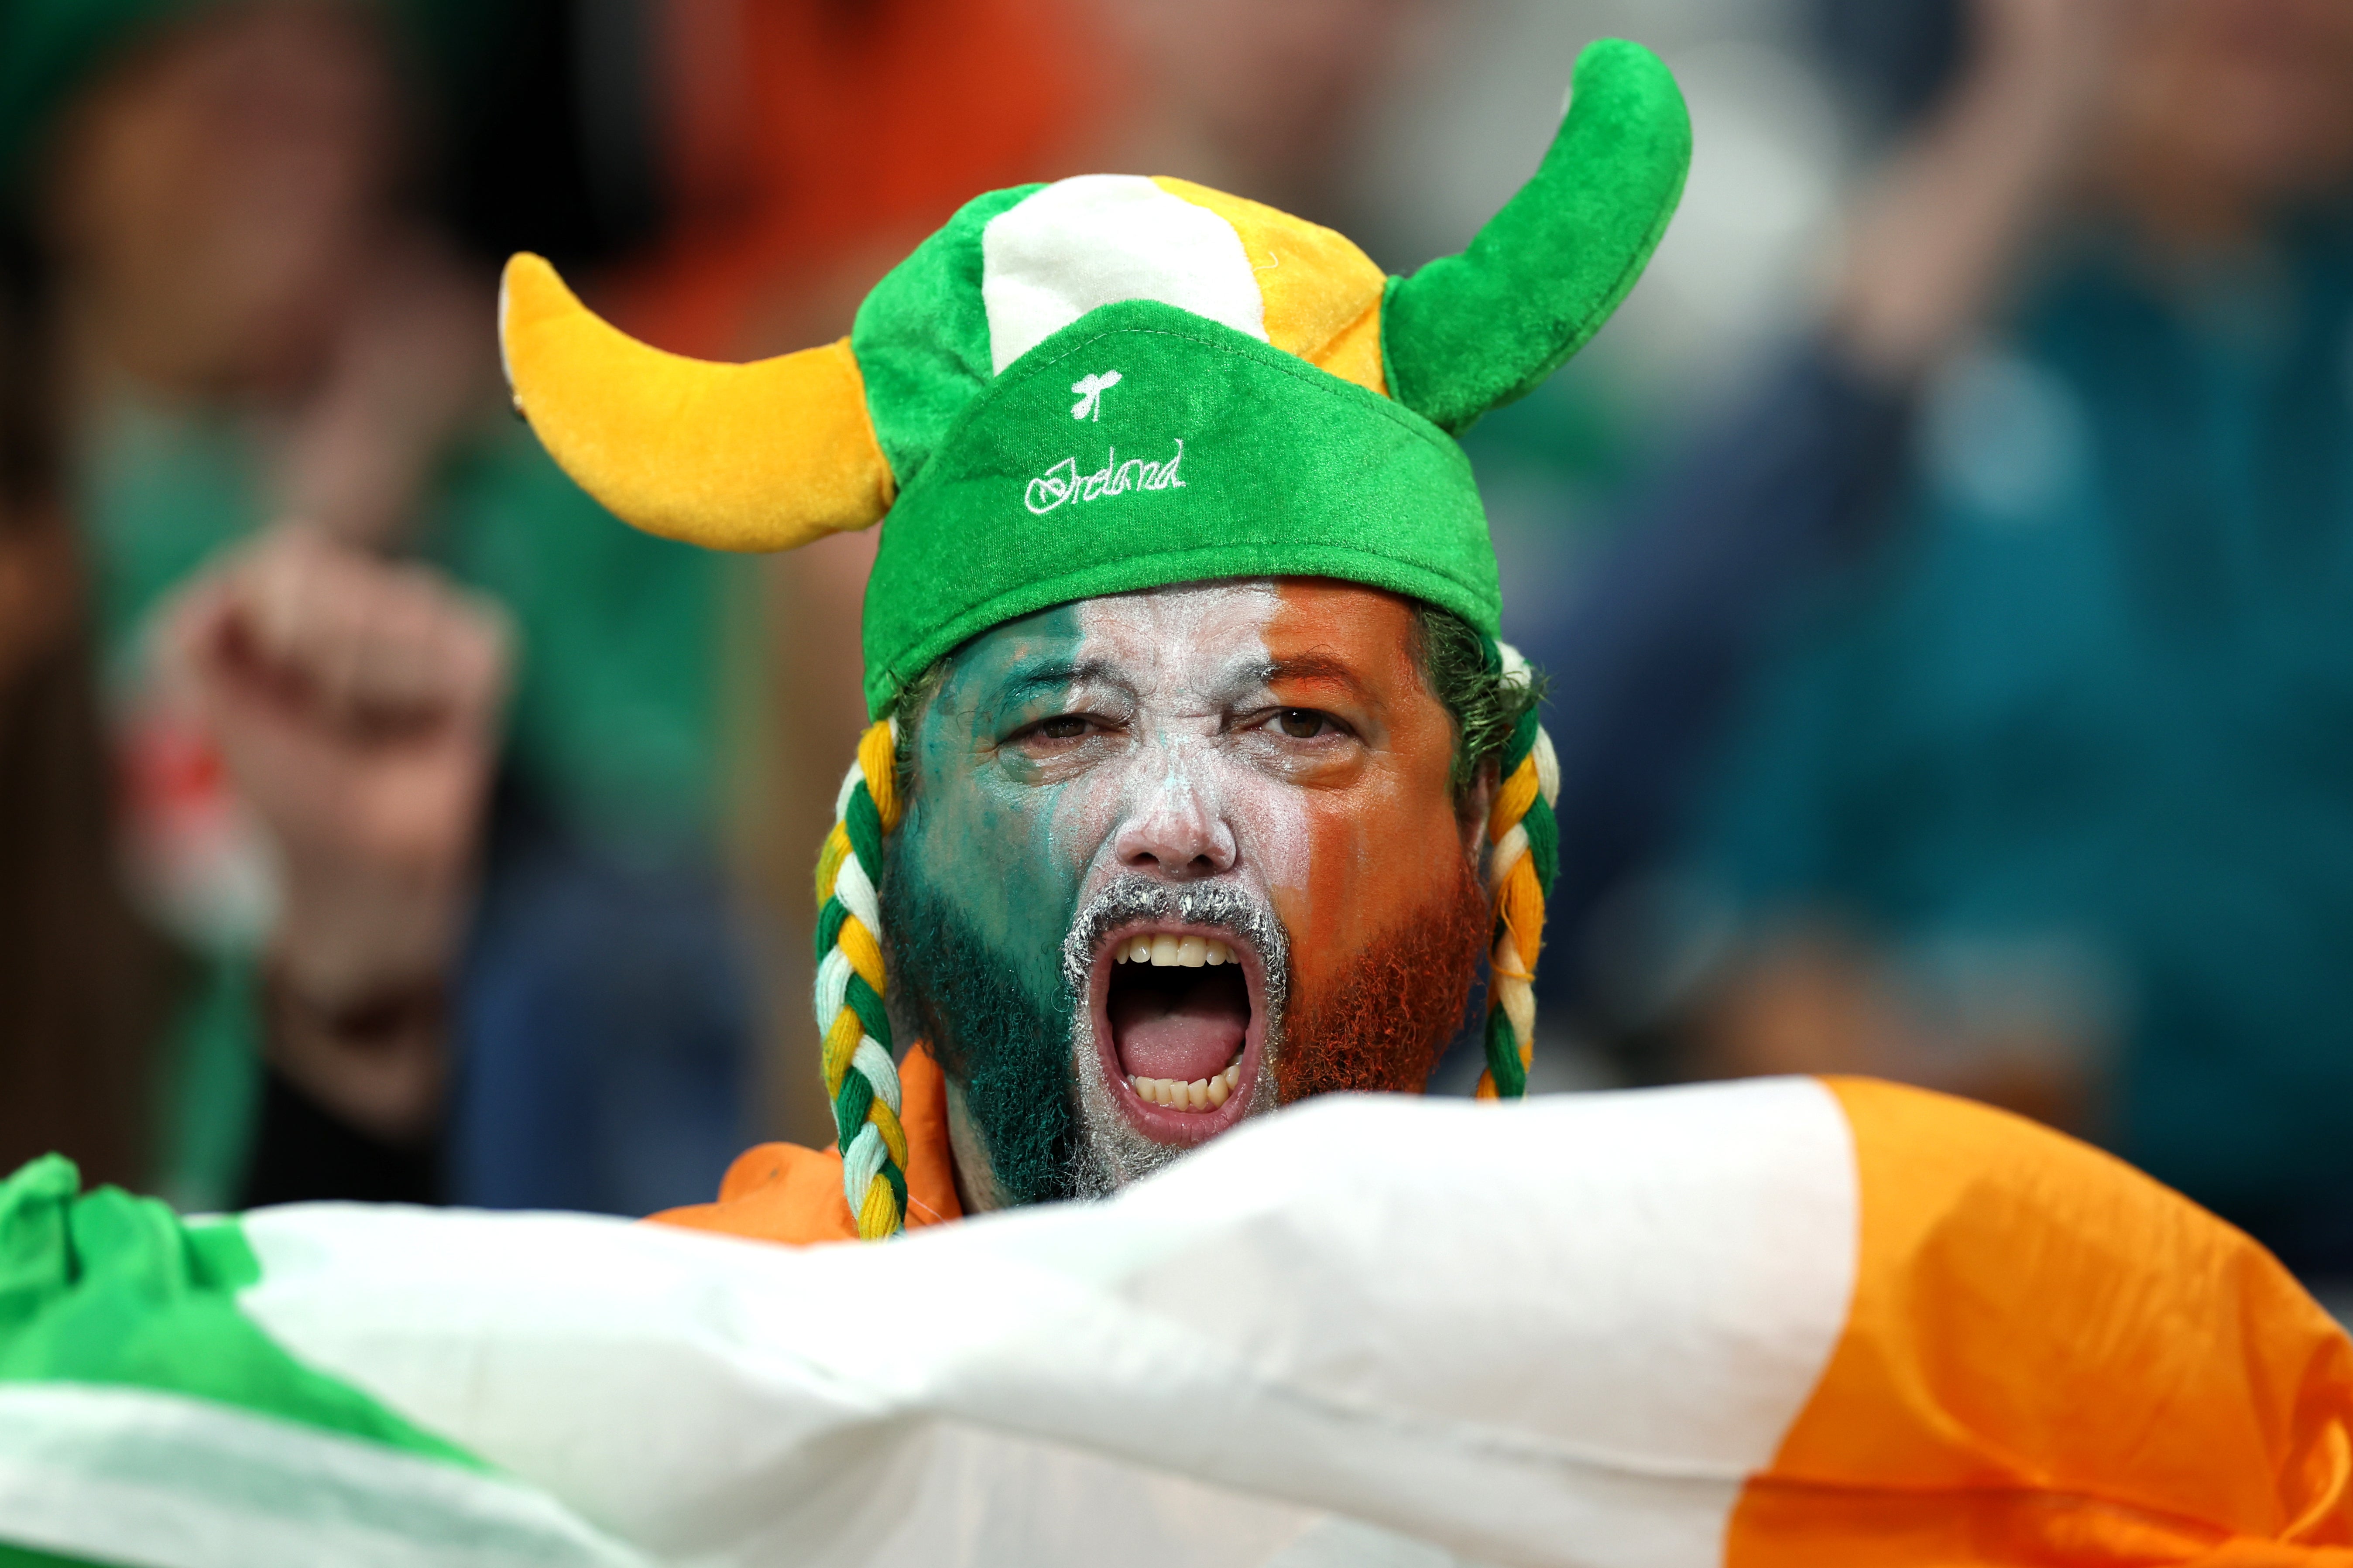 An Ireland fan shows their support prior to the Rugby World Cup quarter-final